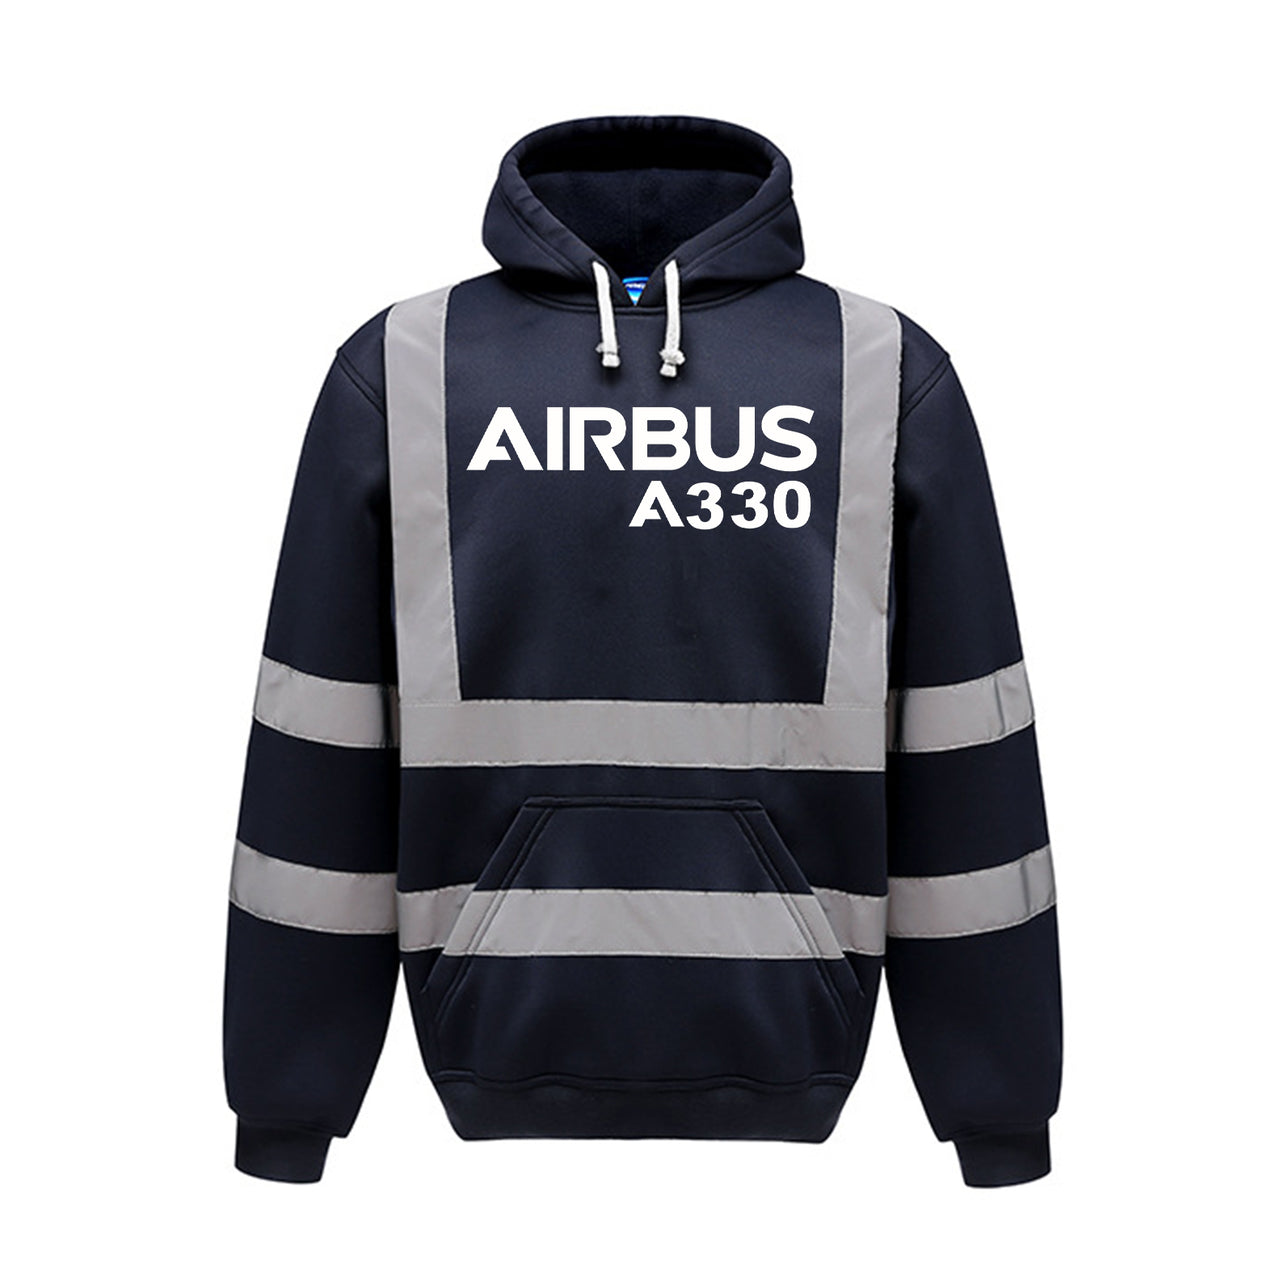 Airbus A330 & Text Designed Reflective Hoodies